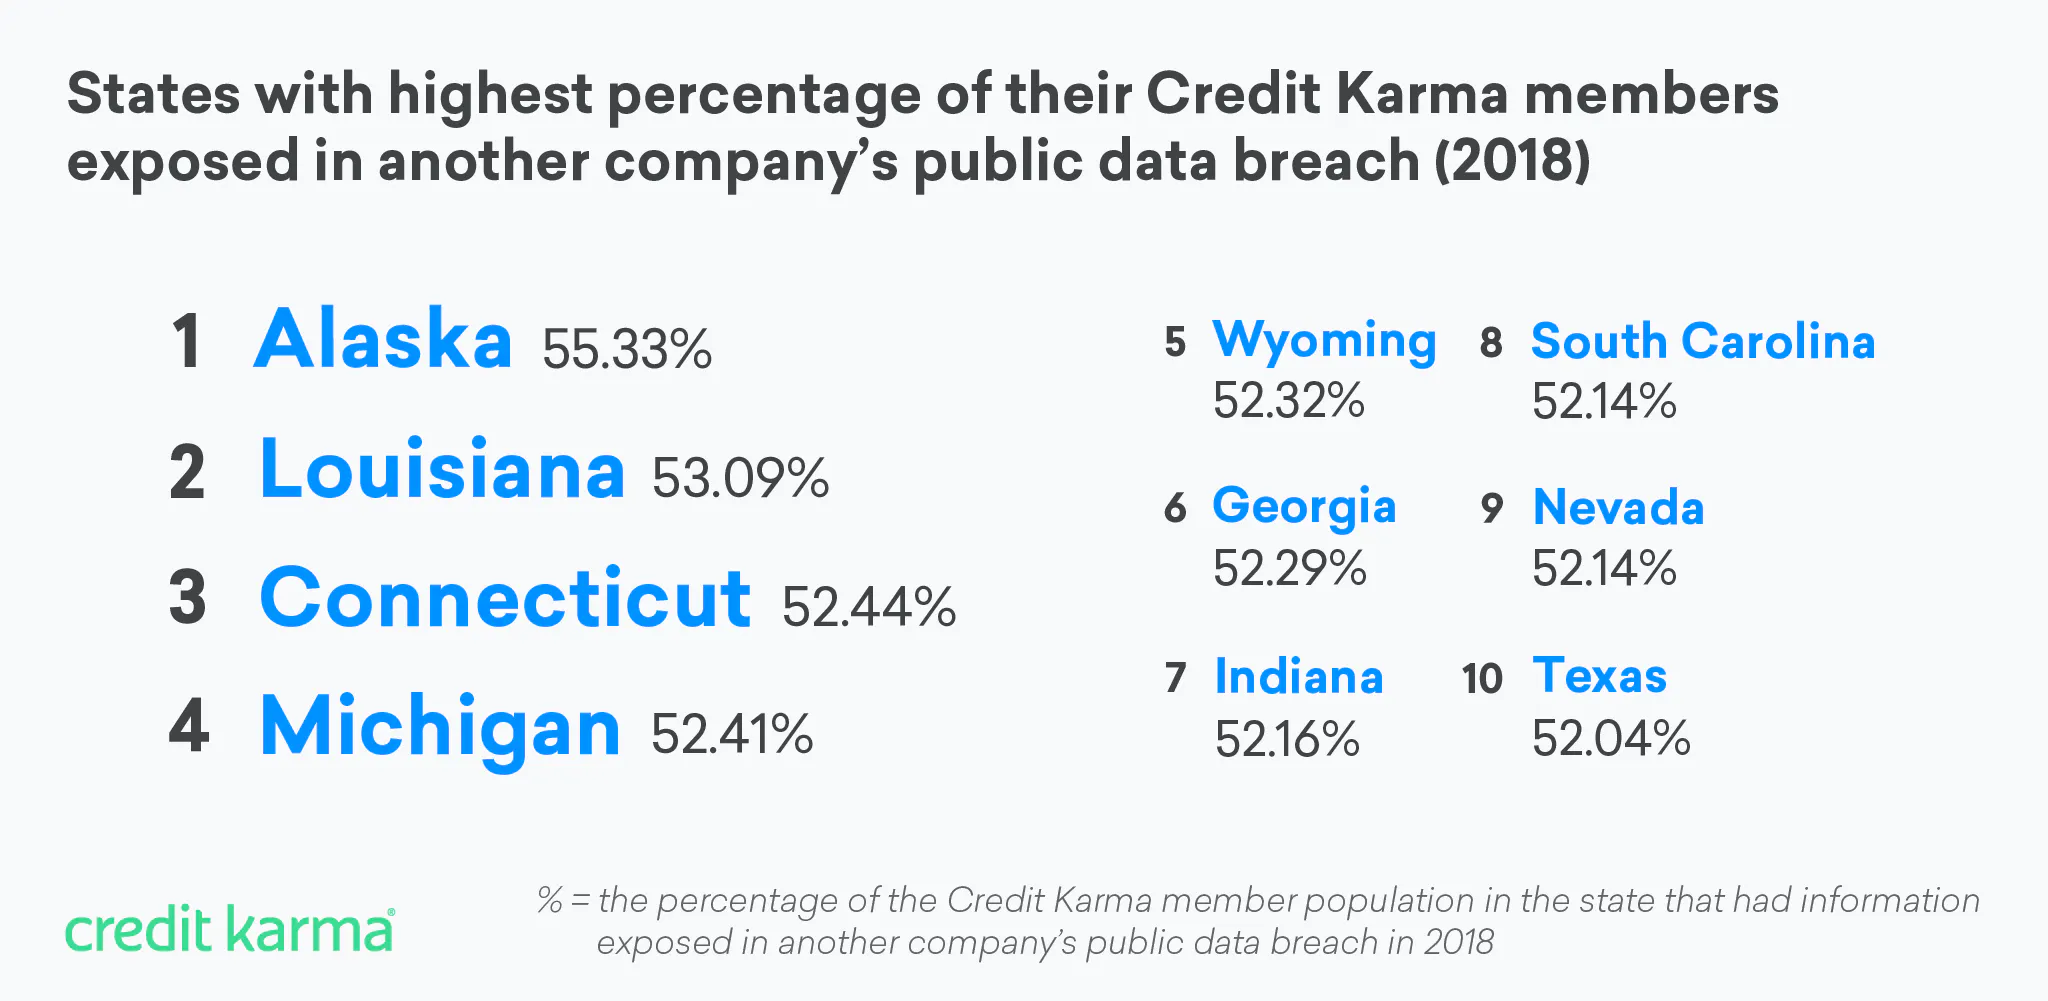 A list of the top 10 states that had the highest percentage of Credit Karma members with data exposed in a breach last year